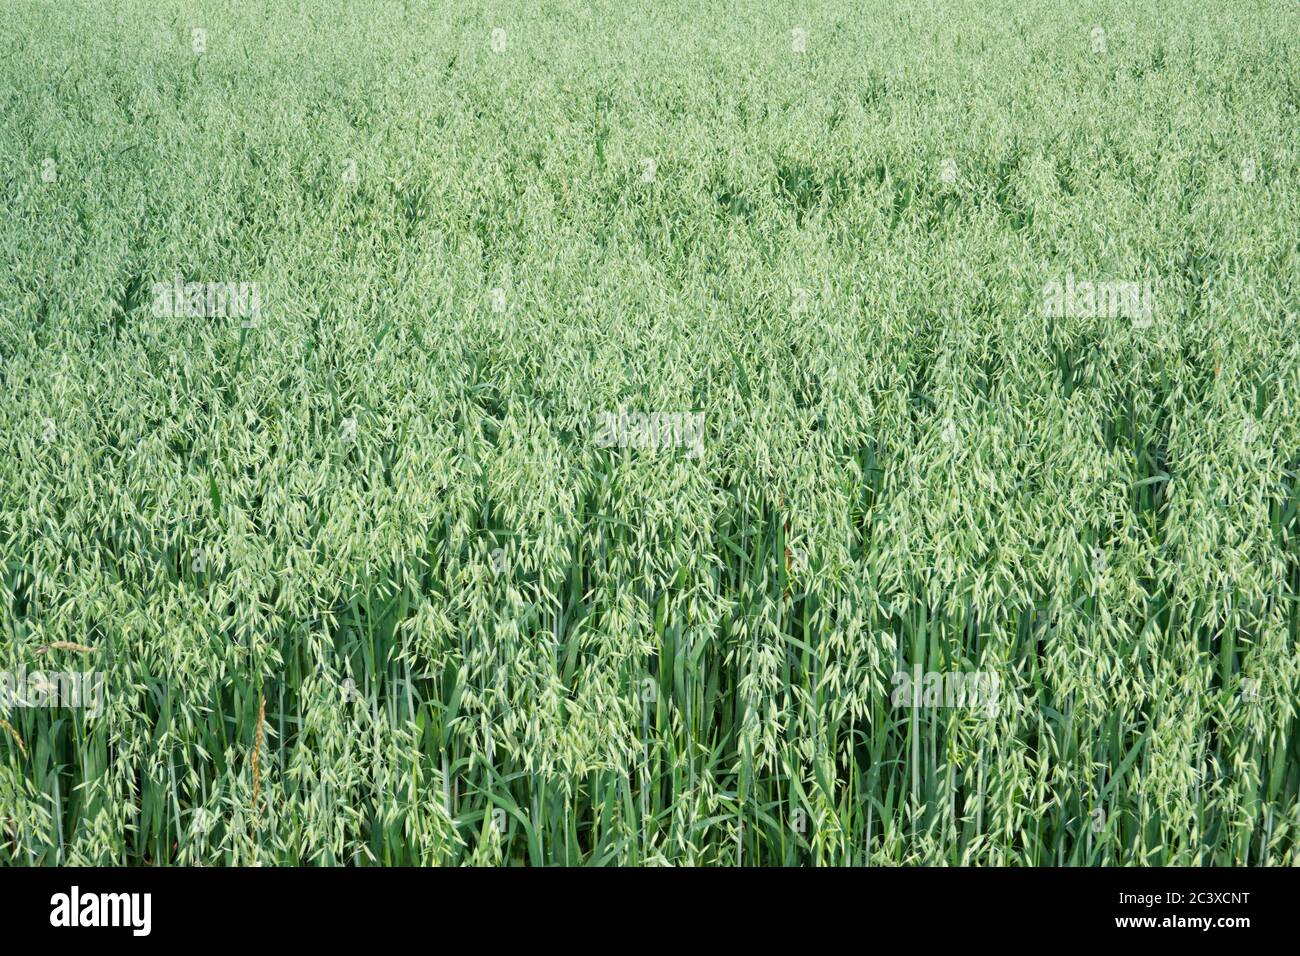 Field of unripe Oats, a natural background Stock Photo